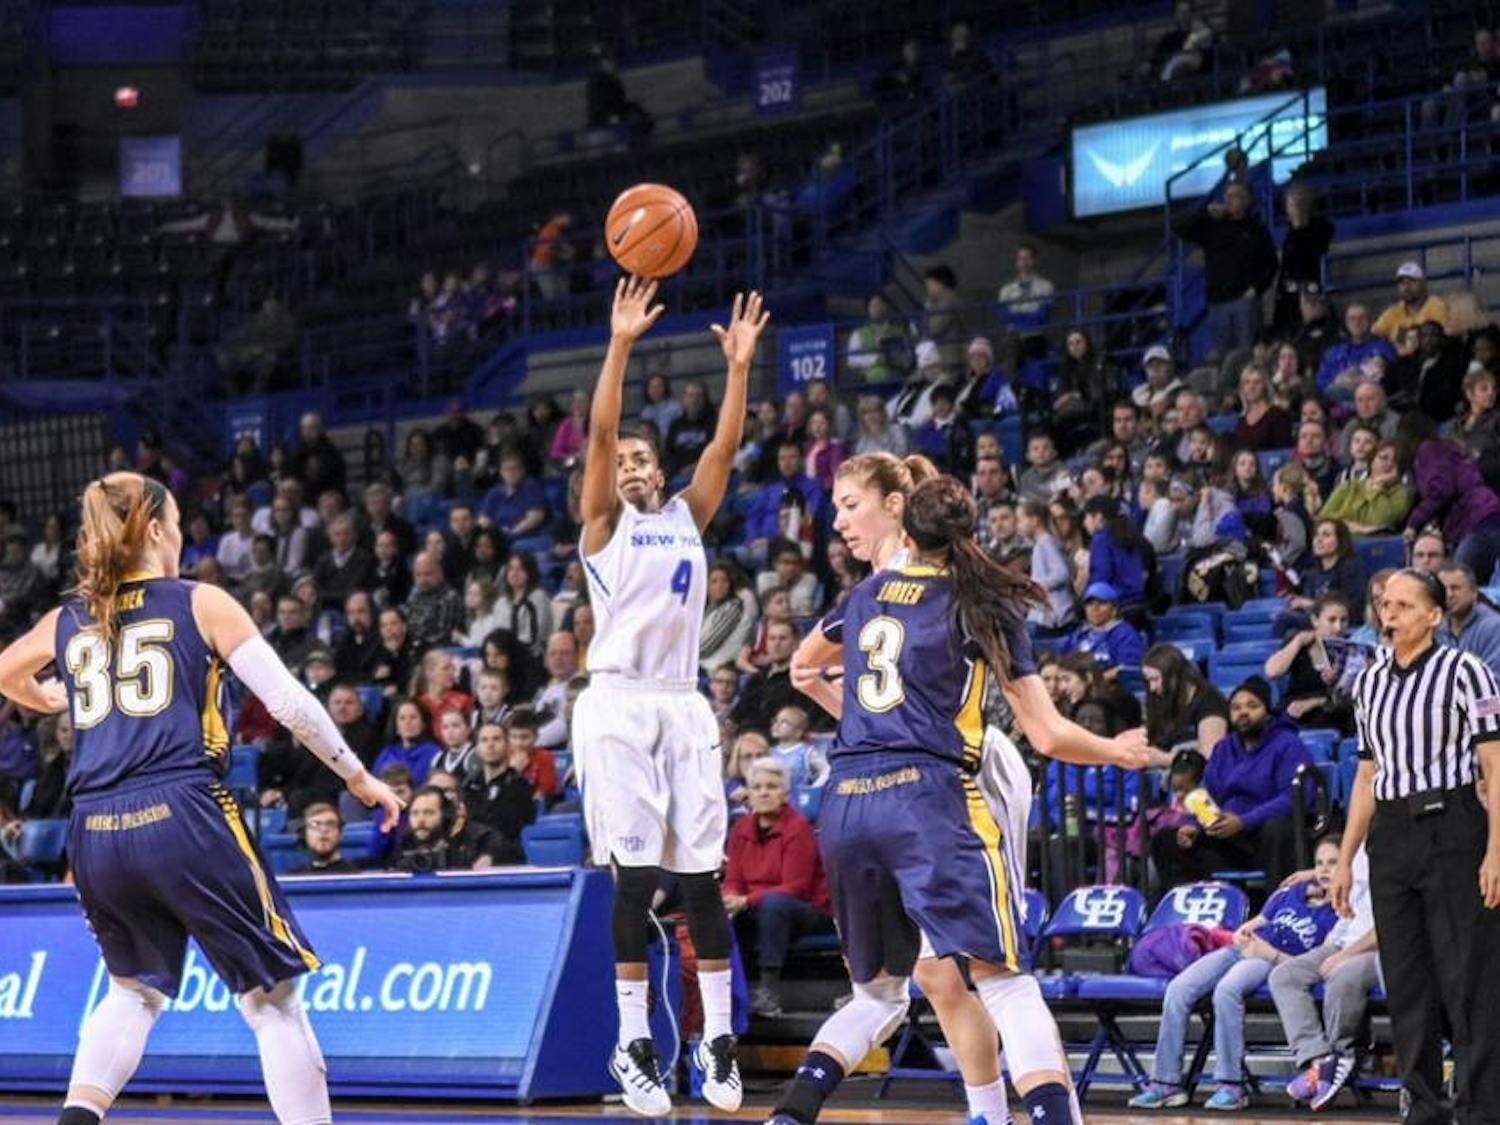 Junior guard Joanna Smith lets off a shot during Buffalo's victory over Kent State in Alumni Arena on March 5.&nbsp;